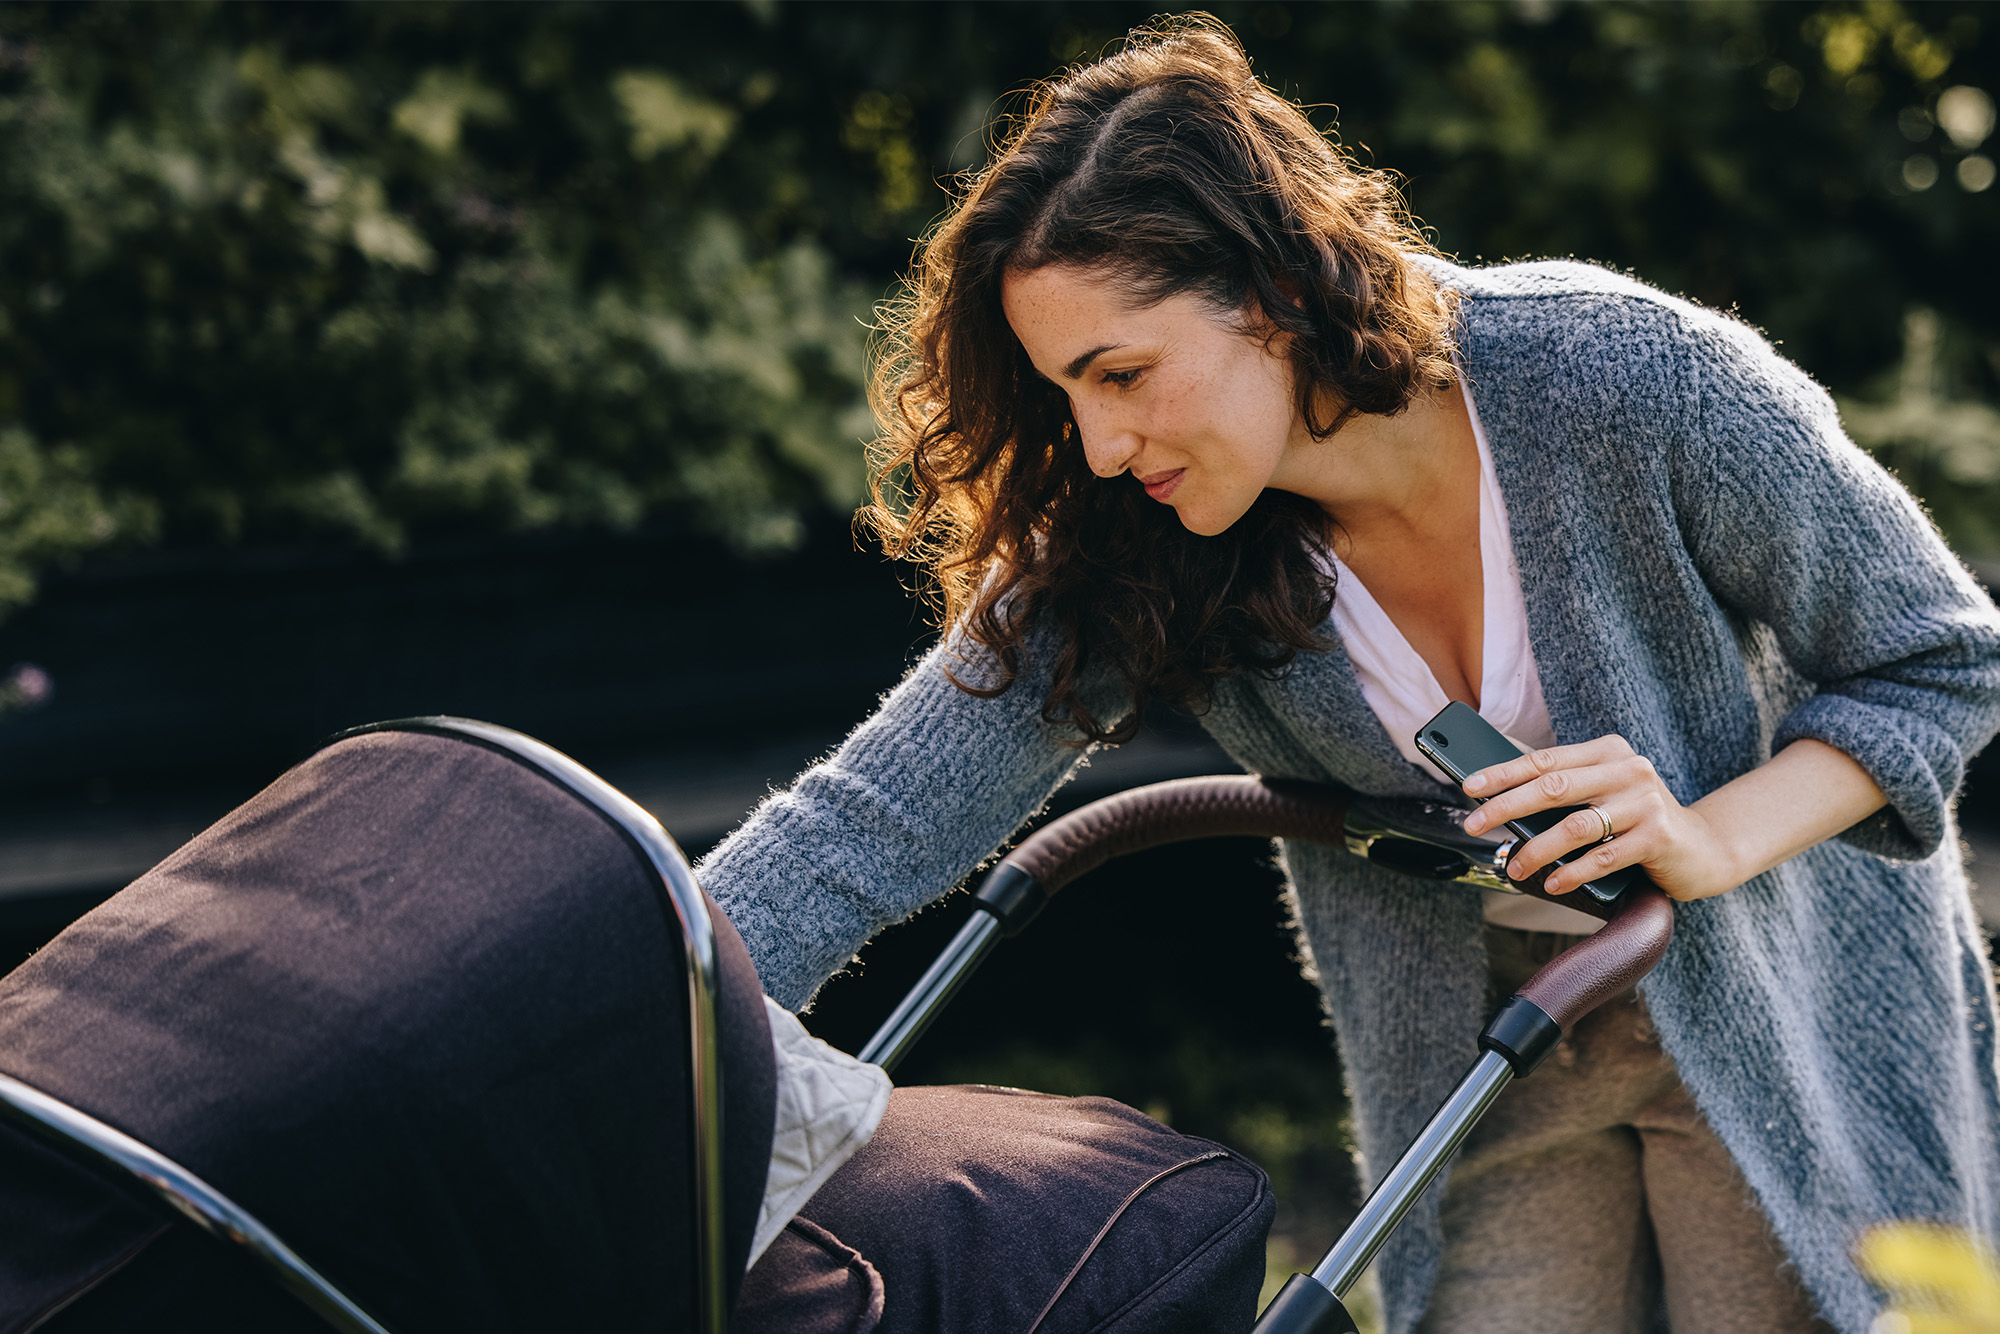 Woman with her baby in stroller outdoors.